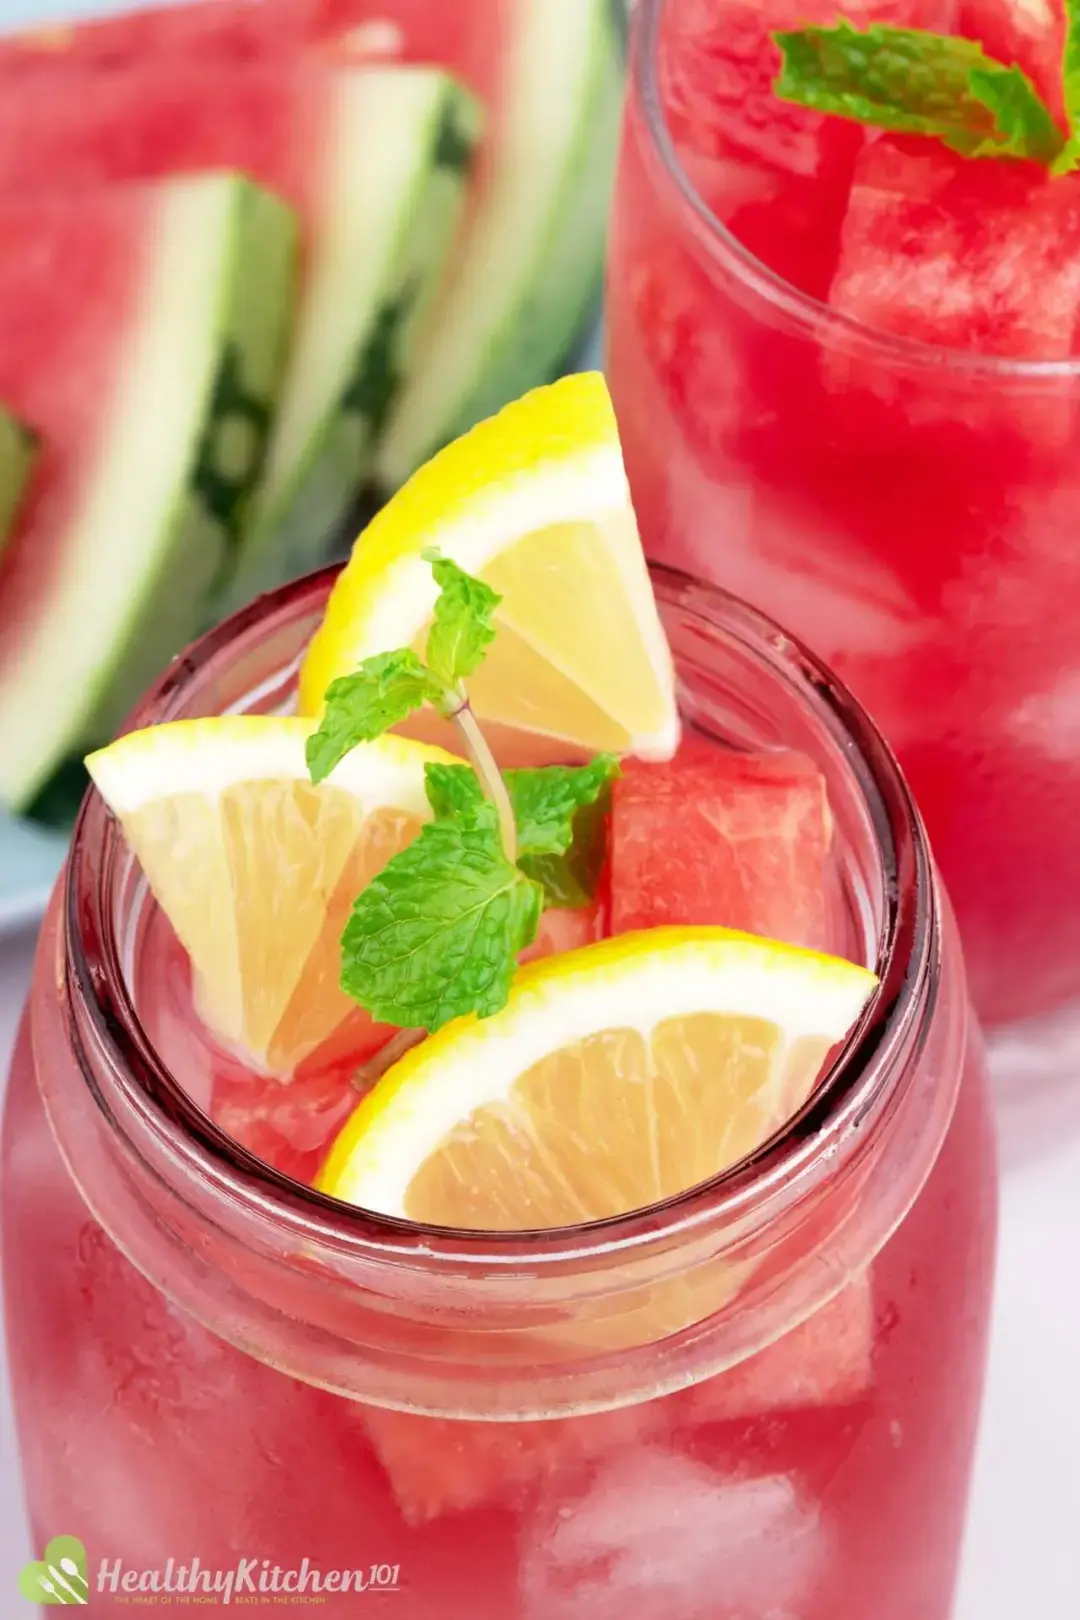 A close-up shot of a jar of watermelon juice and lemon garnished with three slices of lemon and mint leaves with a plate of watermelon slices and a glass of watermelon juice and lemon on the background.